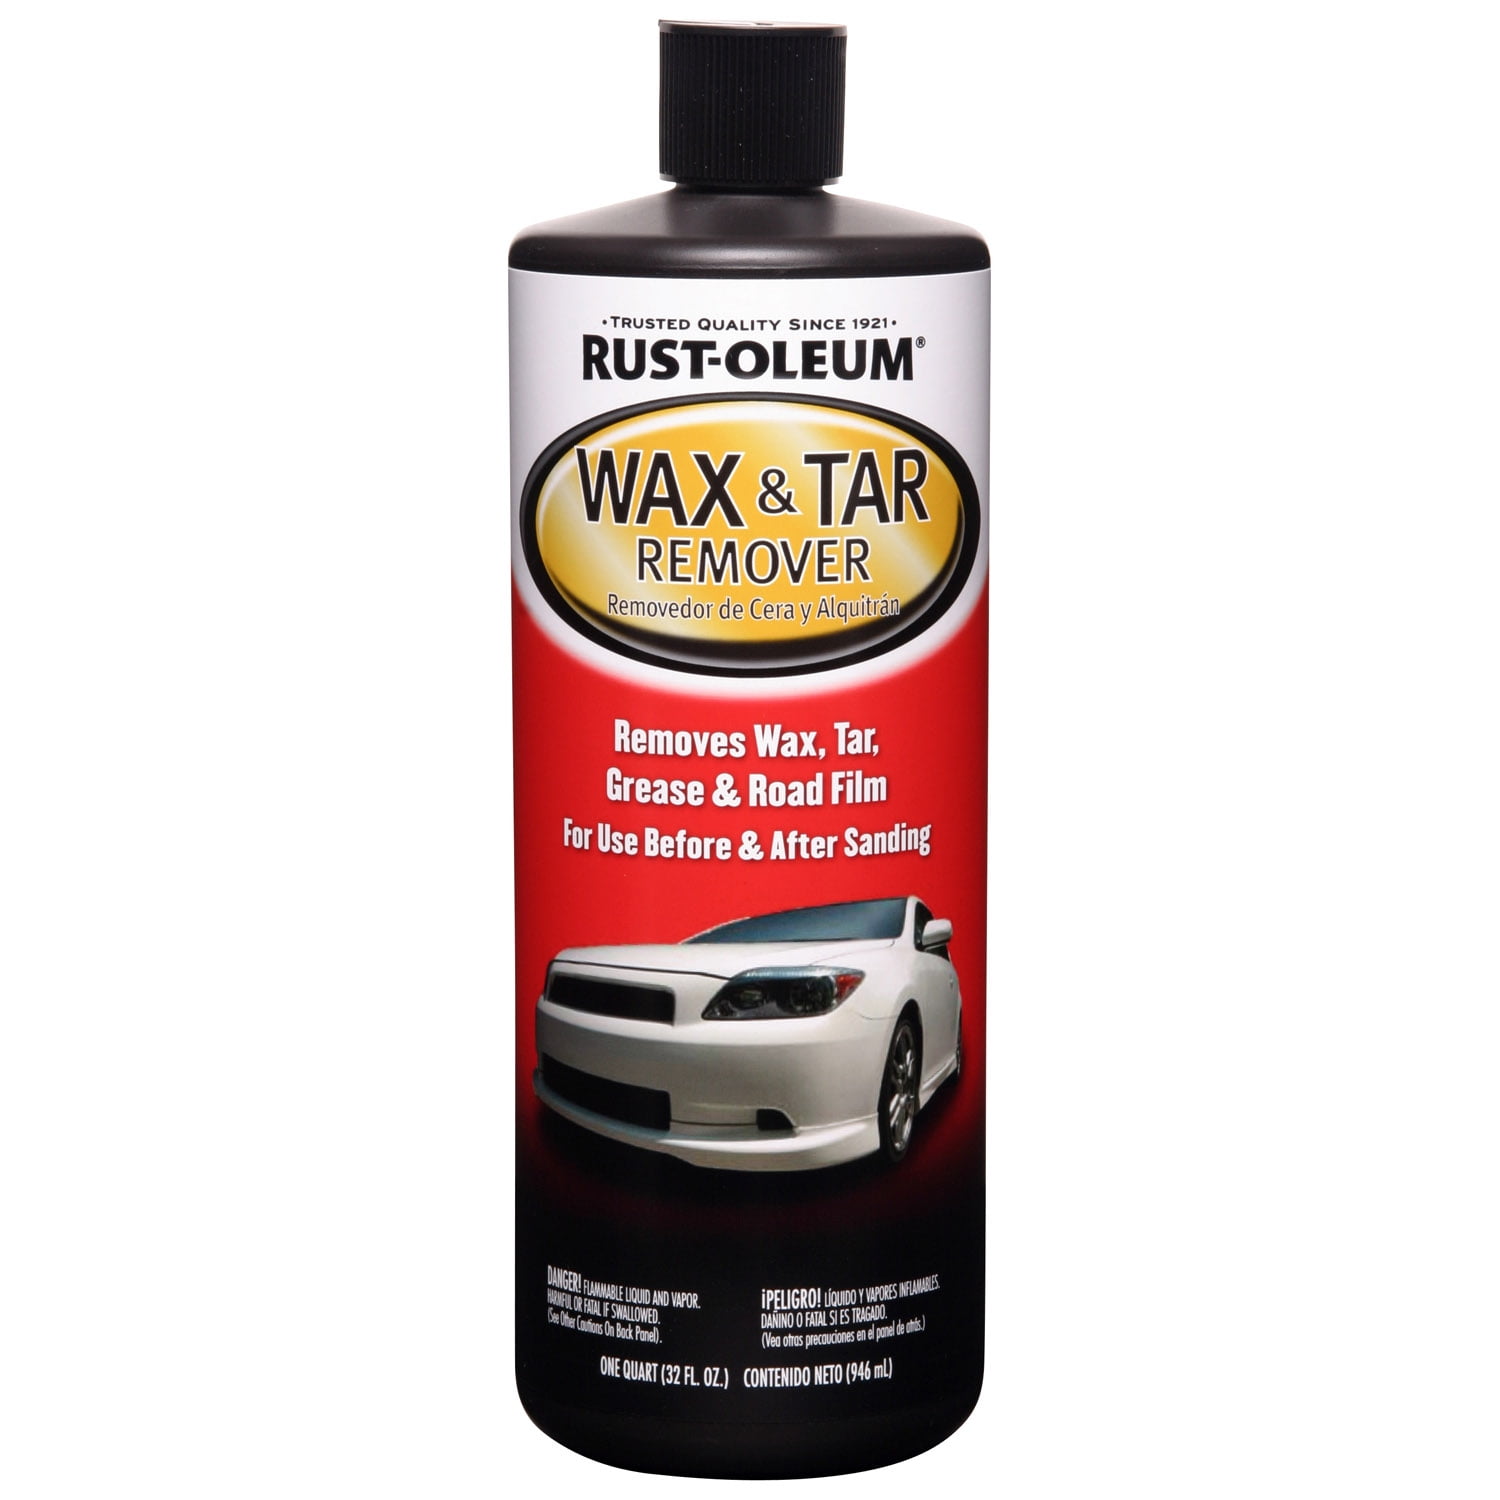 Prep All Wax And Grease Remover